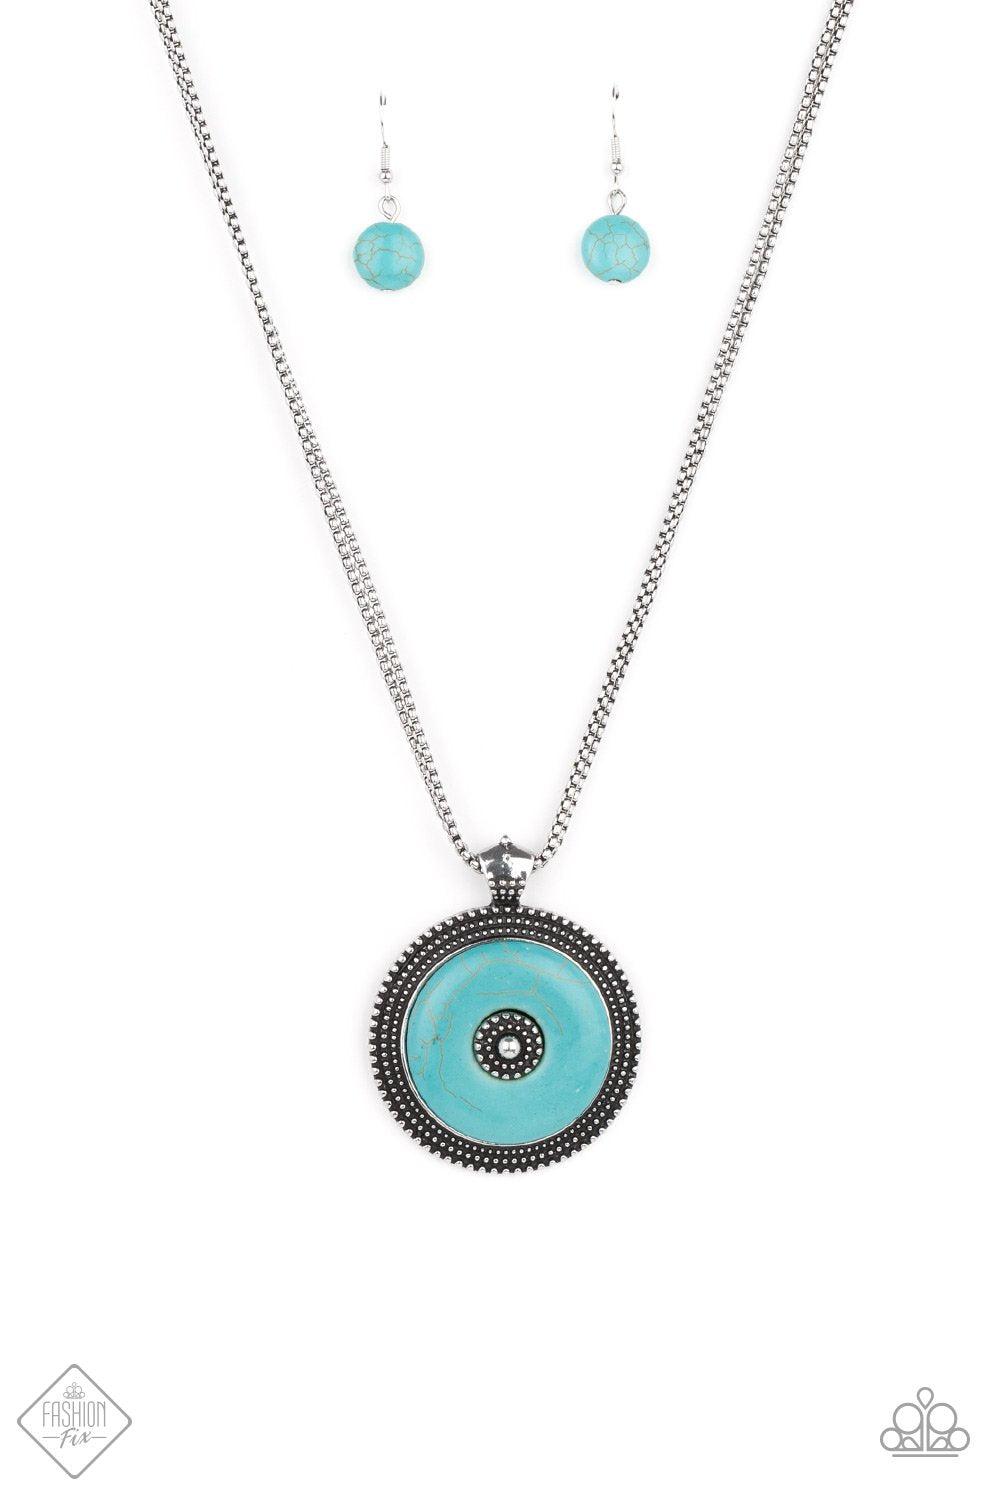 EPICENTER of Attention Turquoise Blue and Silver Necklace - Paparazzi Accessories- lightbox - CarasShop.com - $5 Jewelry by Cara Jewels